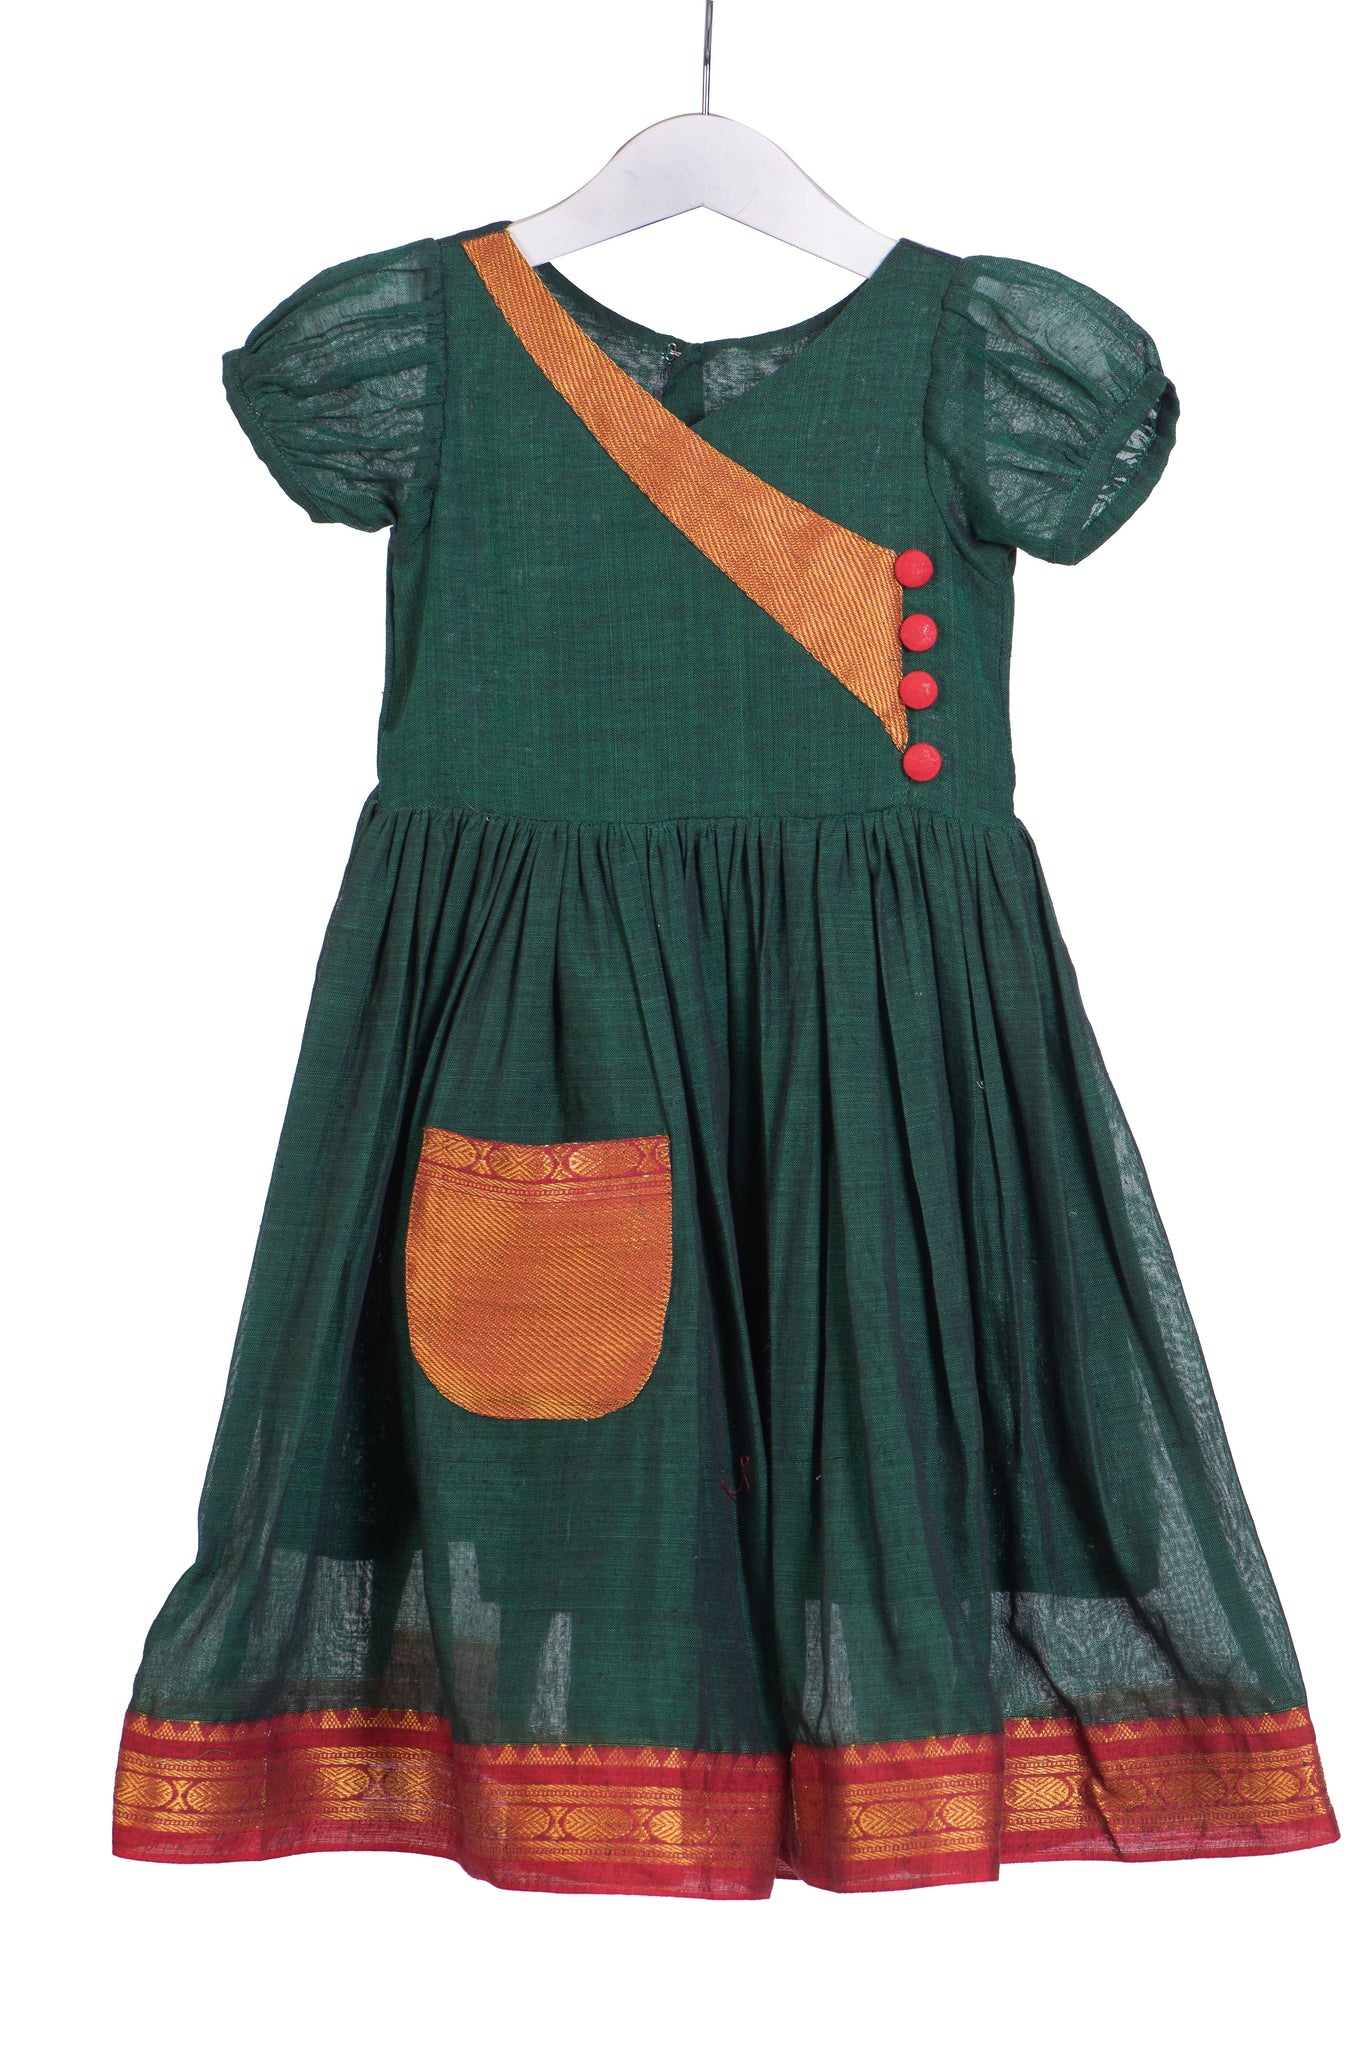 Green and Red Cotton Dress with Pocket